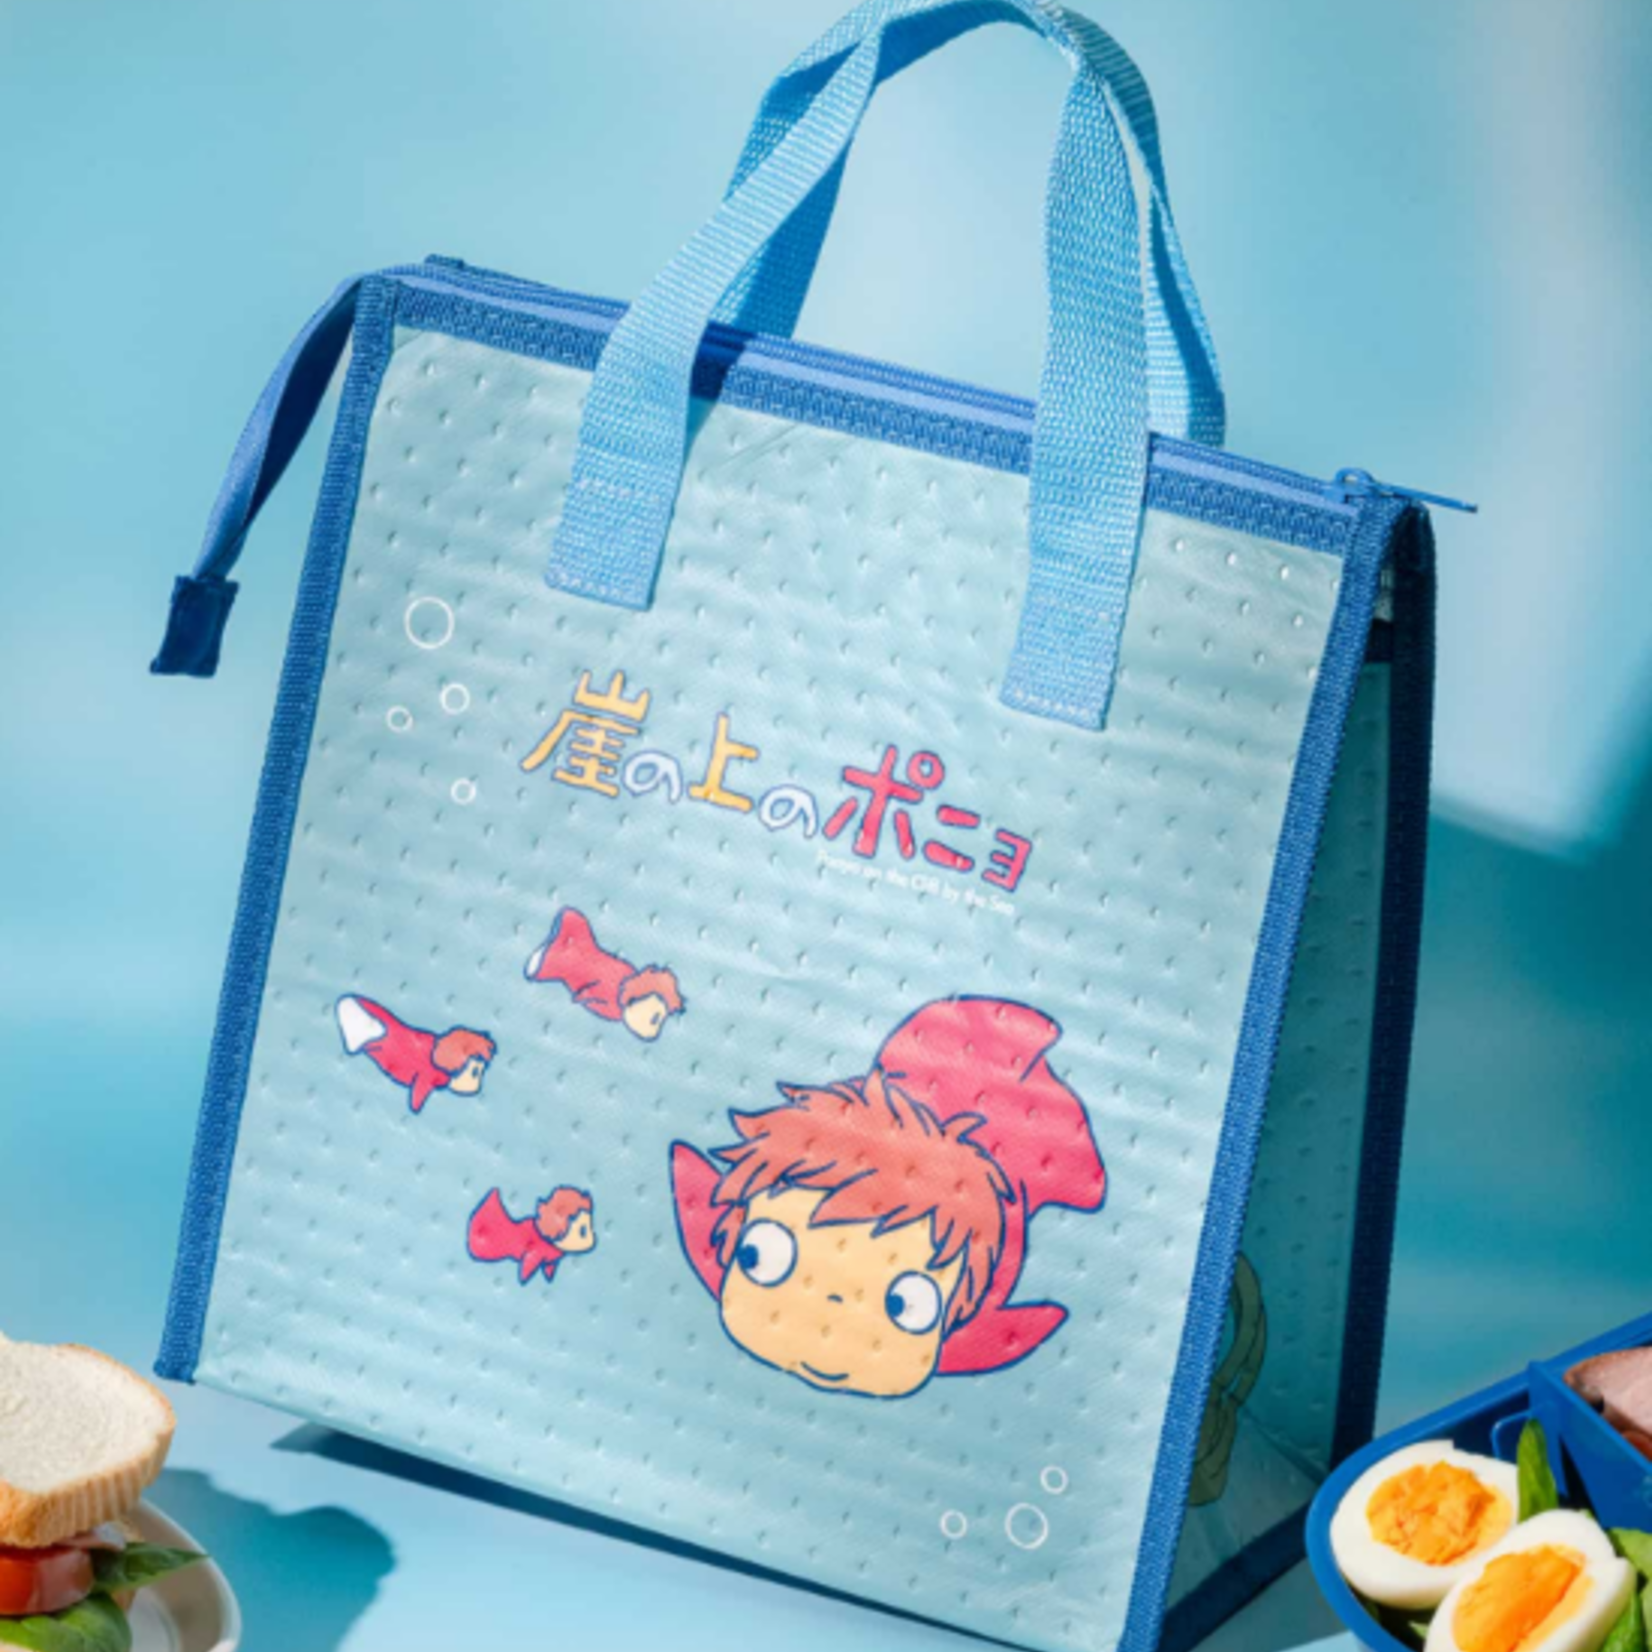 Clever Idiots Ponyo Insulated Lunch Bag (Ponyo and Ponyo's sisters)